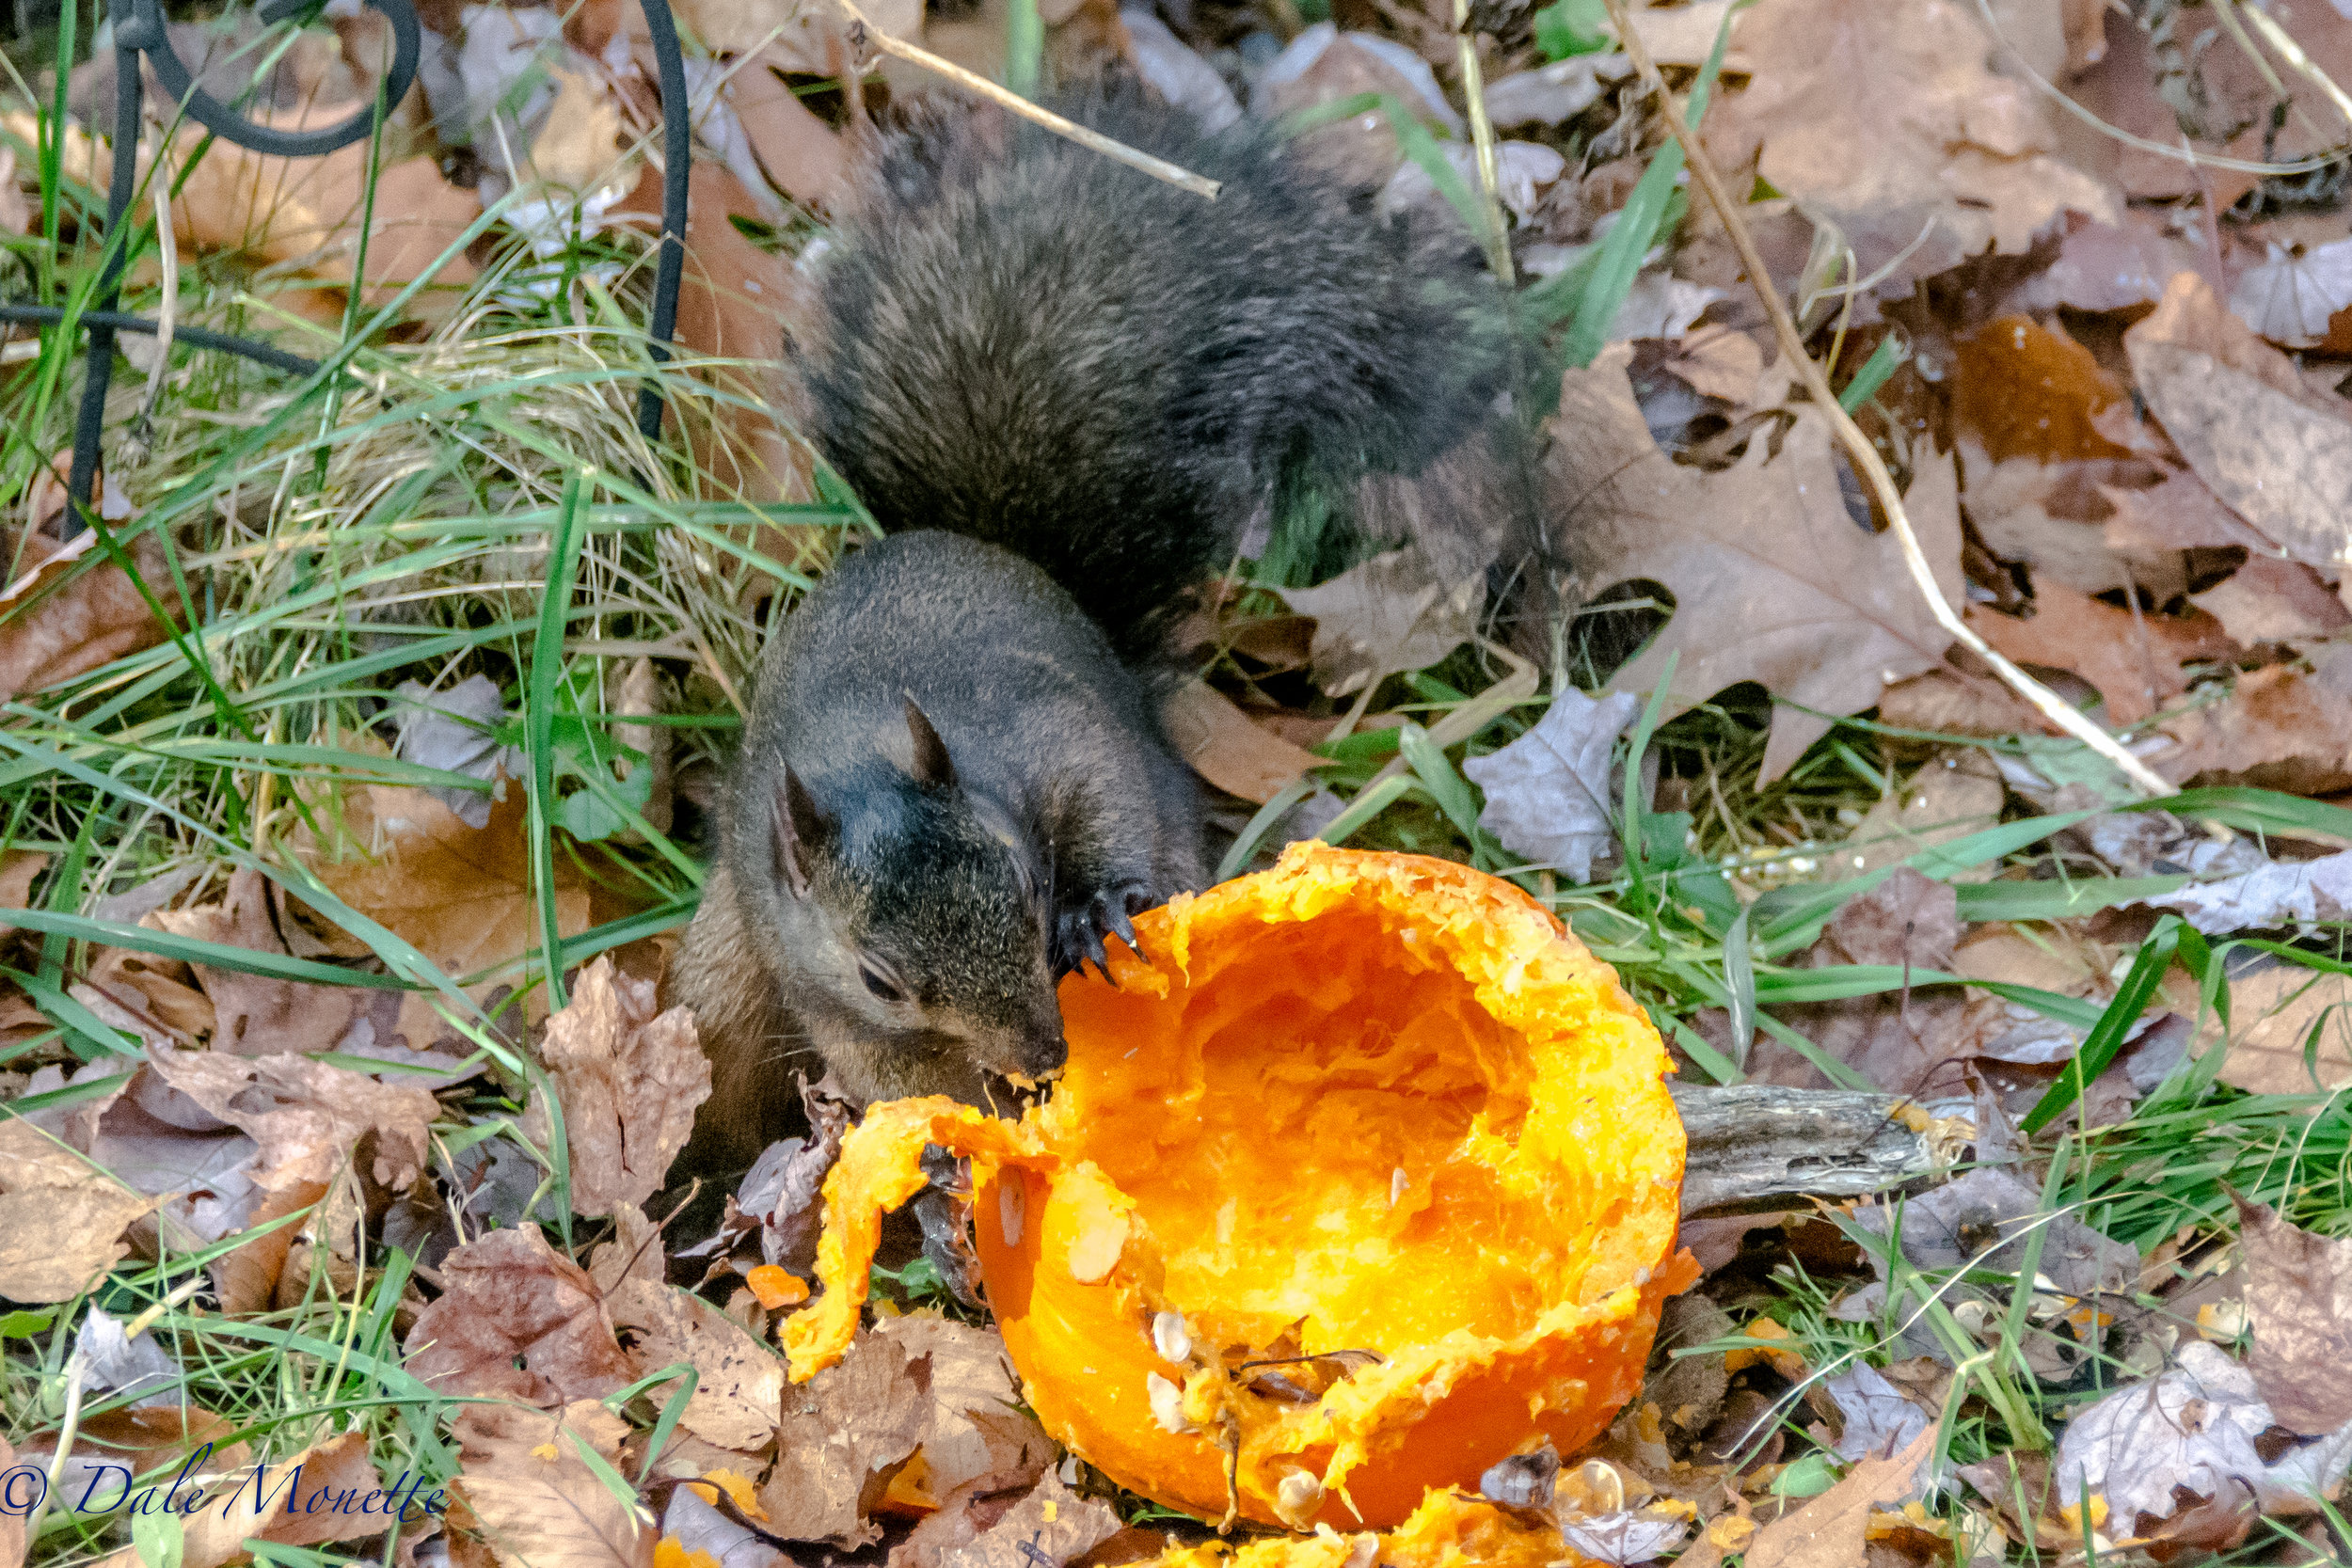    One of the 2 black squirrels we have here was enjoying the pumpkin we put out there for them. We have 4 grays and 2 blacks keeping it exciting around here most of the time..... &nbsp;12/3/16   